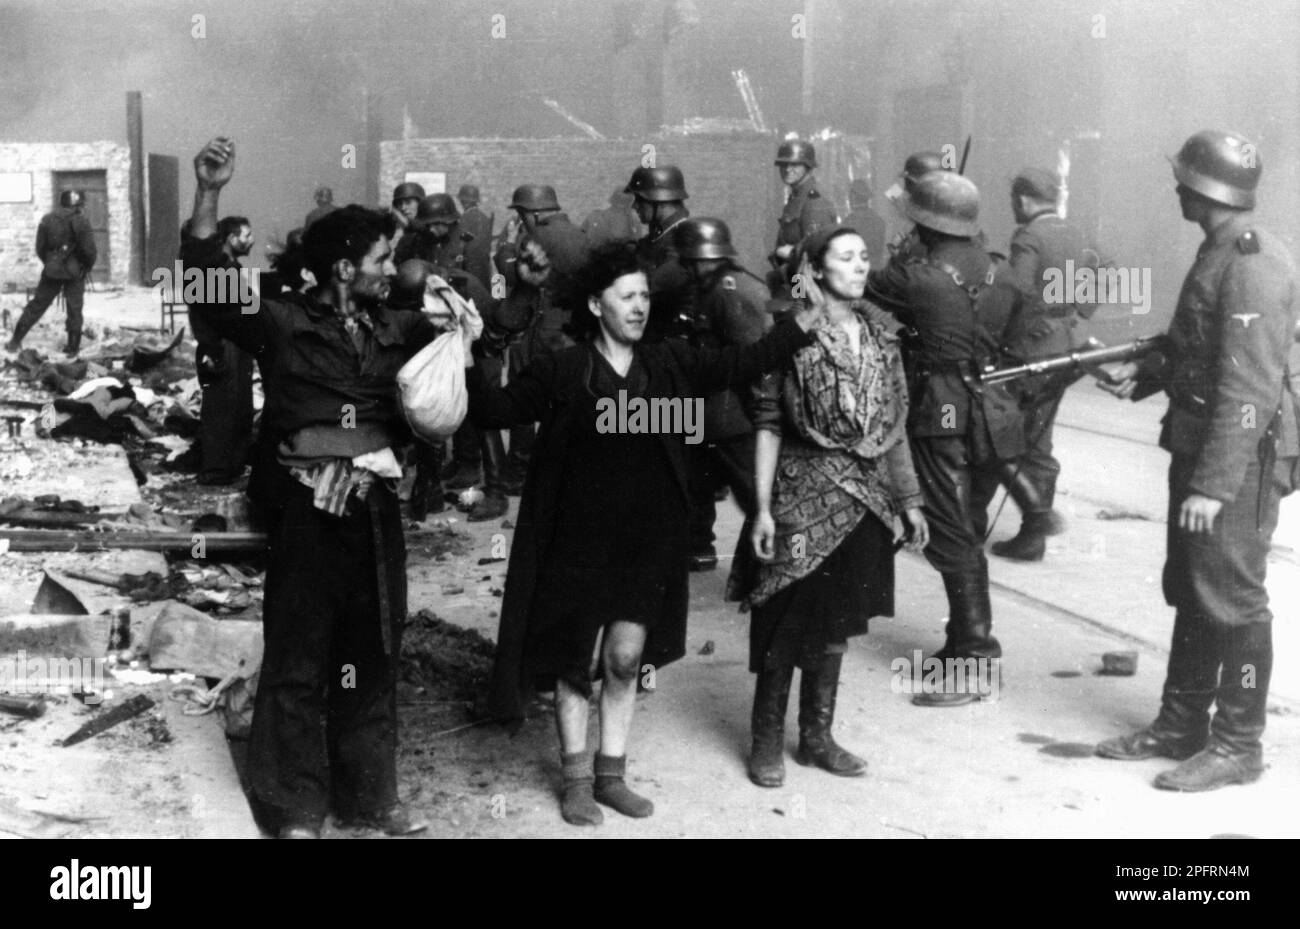 In January 1943 the nazis arrived to round up the Jews of the Warsaw Ghetto  The Jews, resolved to fight it out, took on the SS with homemade and primitive weapons. The defenders were executed or deported and the Ghetto area was systematically demolished. This event is known as The Ghetto Uprising. This image shows a group of jewish women surrendering, hands up, to German soldiers. Woman on the right has been named as Hasia Szylgold-Szpiro. This image is from the German photographic record of the event, known as the Stroop report. Stock Photo